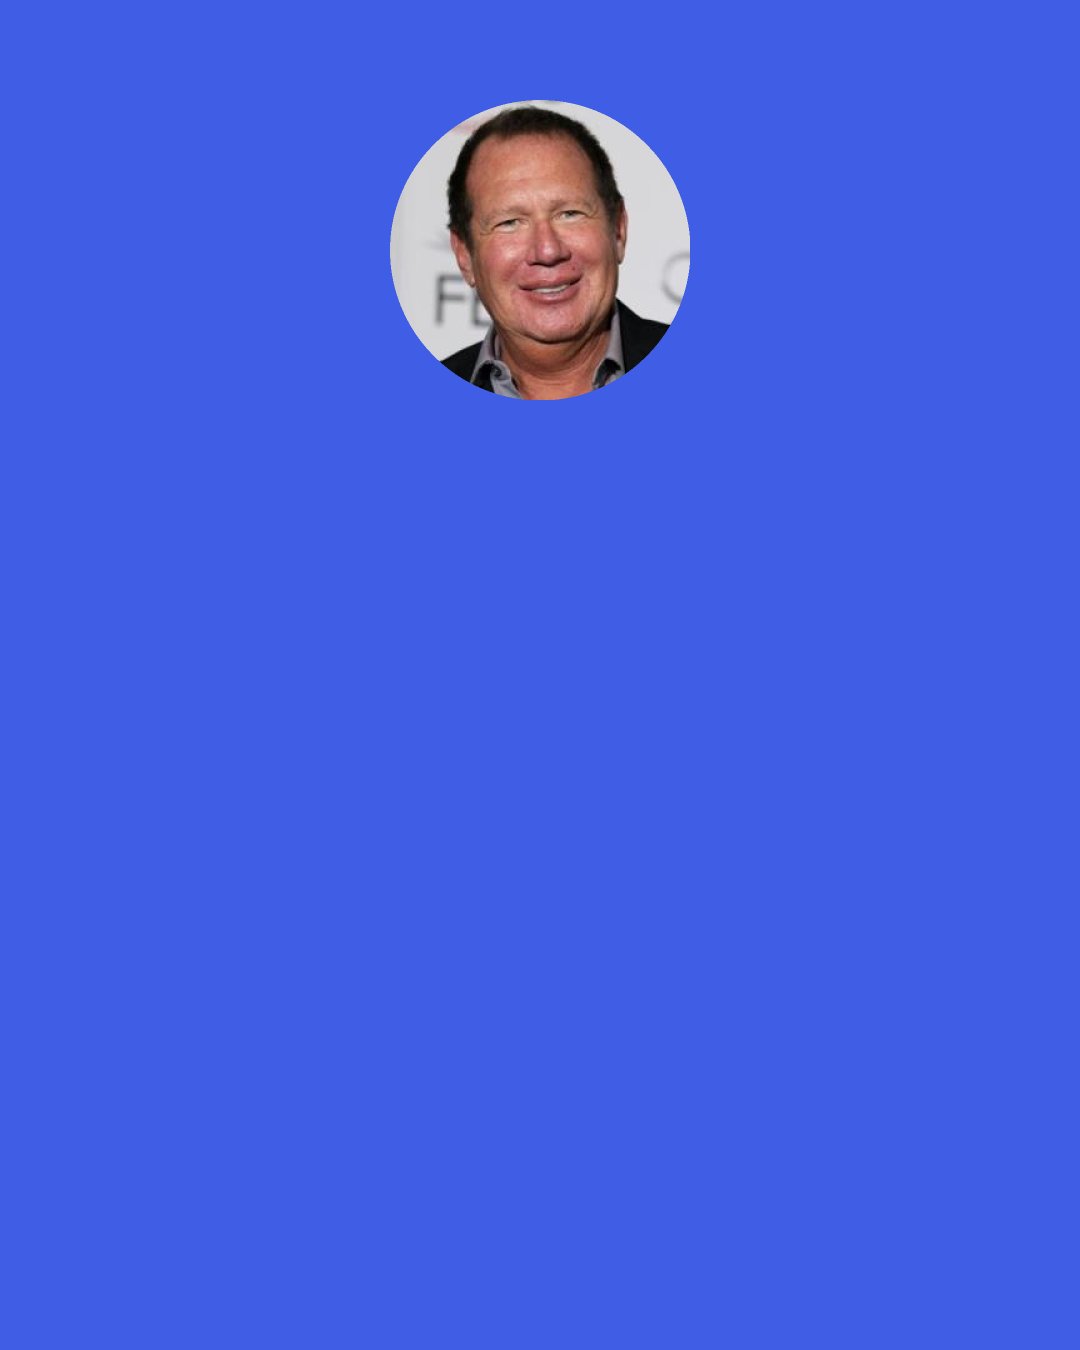 Garry Shandling: My dog watches me on TV. So, if I may take this opportunity, "No! No! No!"